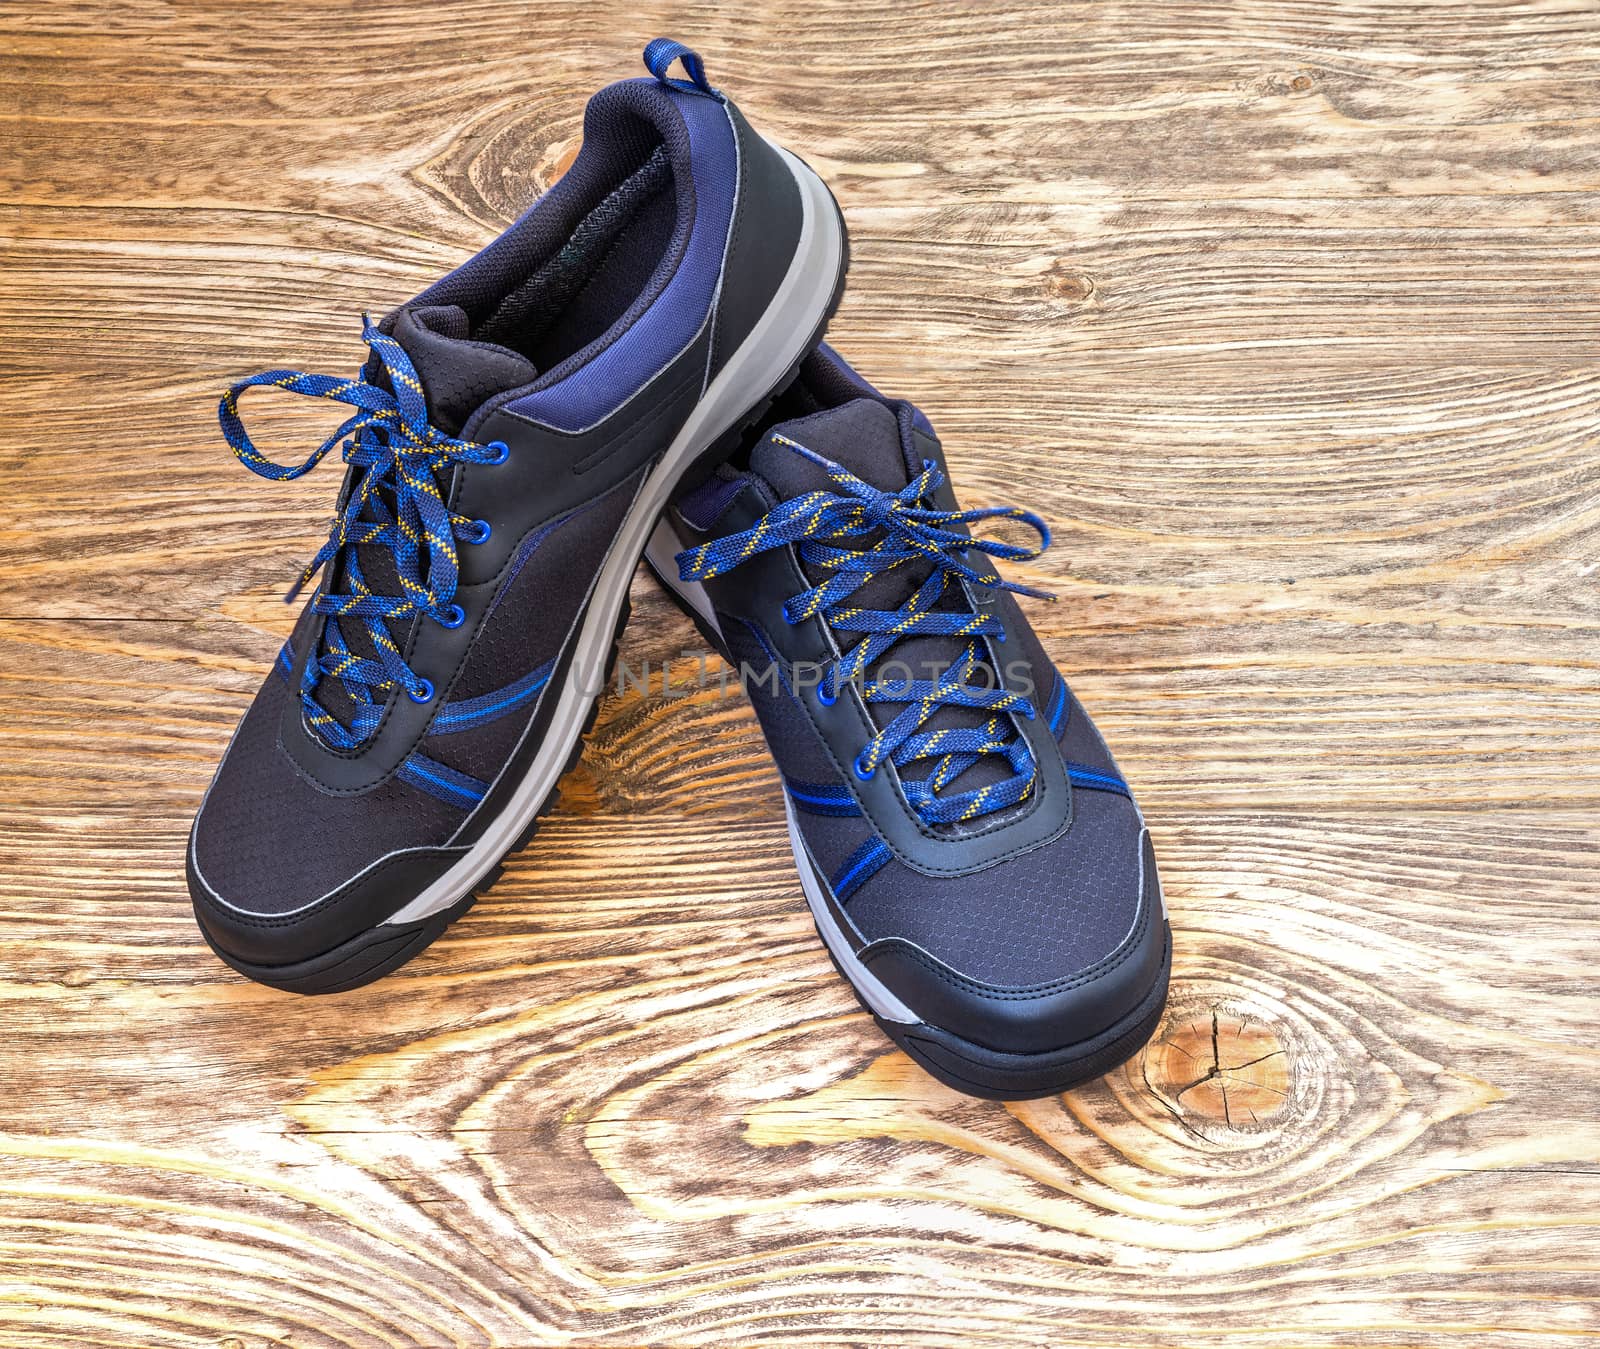 black and blue outdoor empty clean lightweight waterproof sneakers on wooden surface